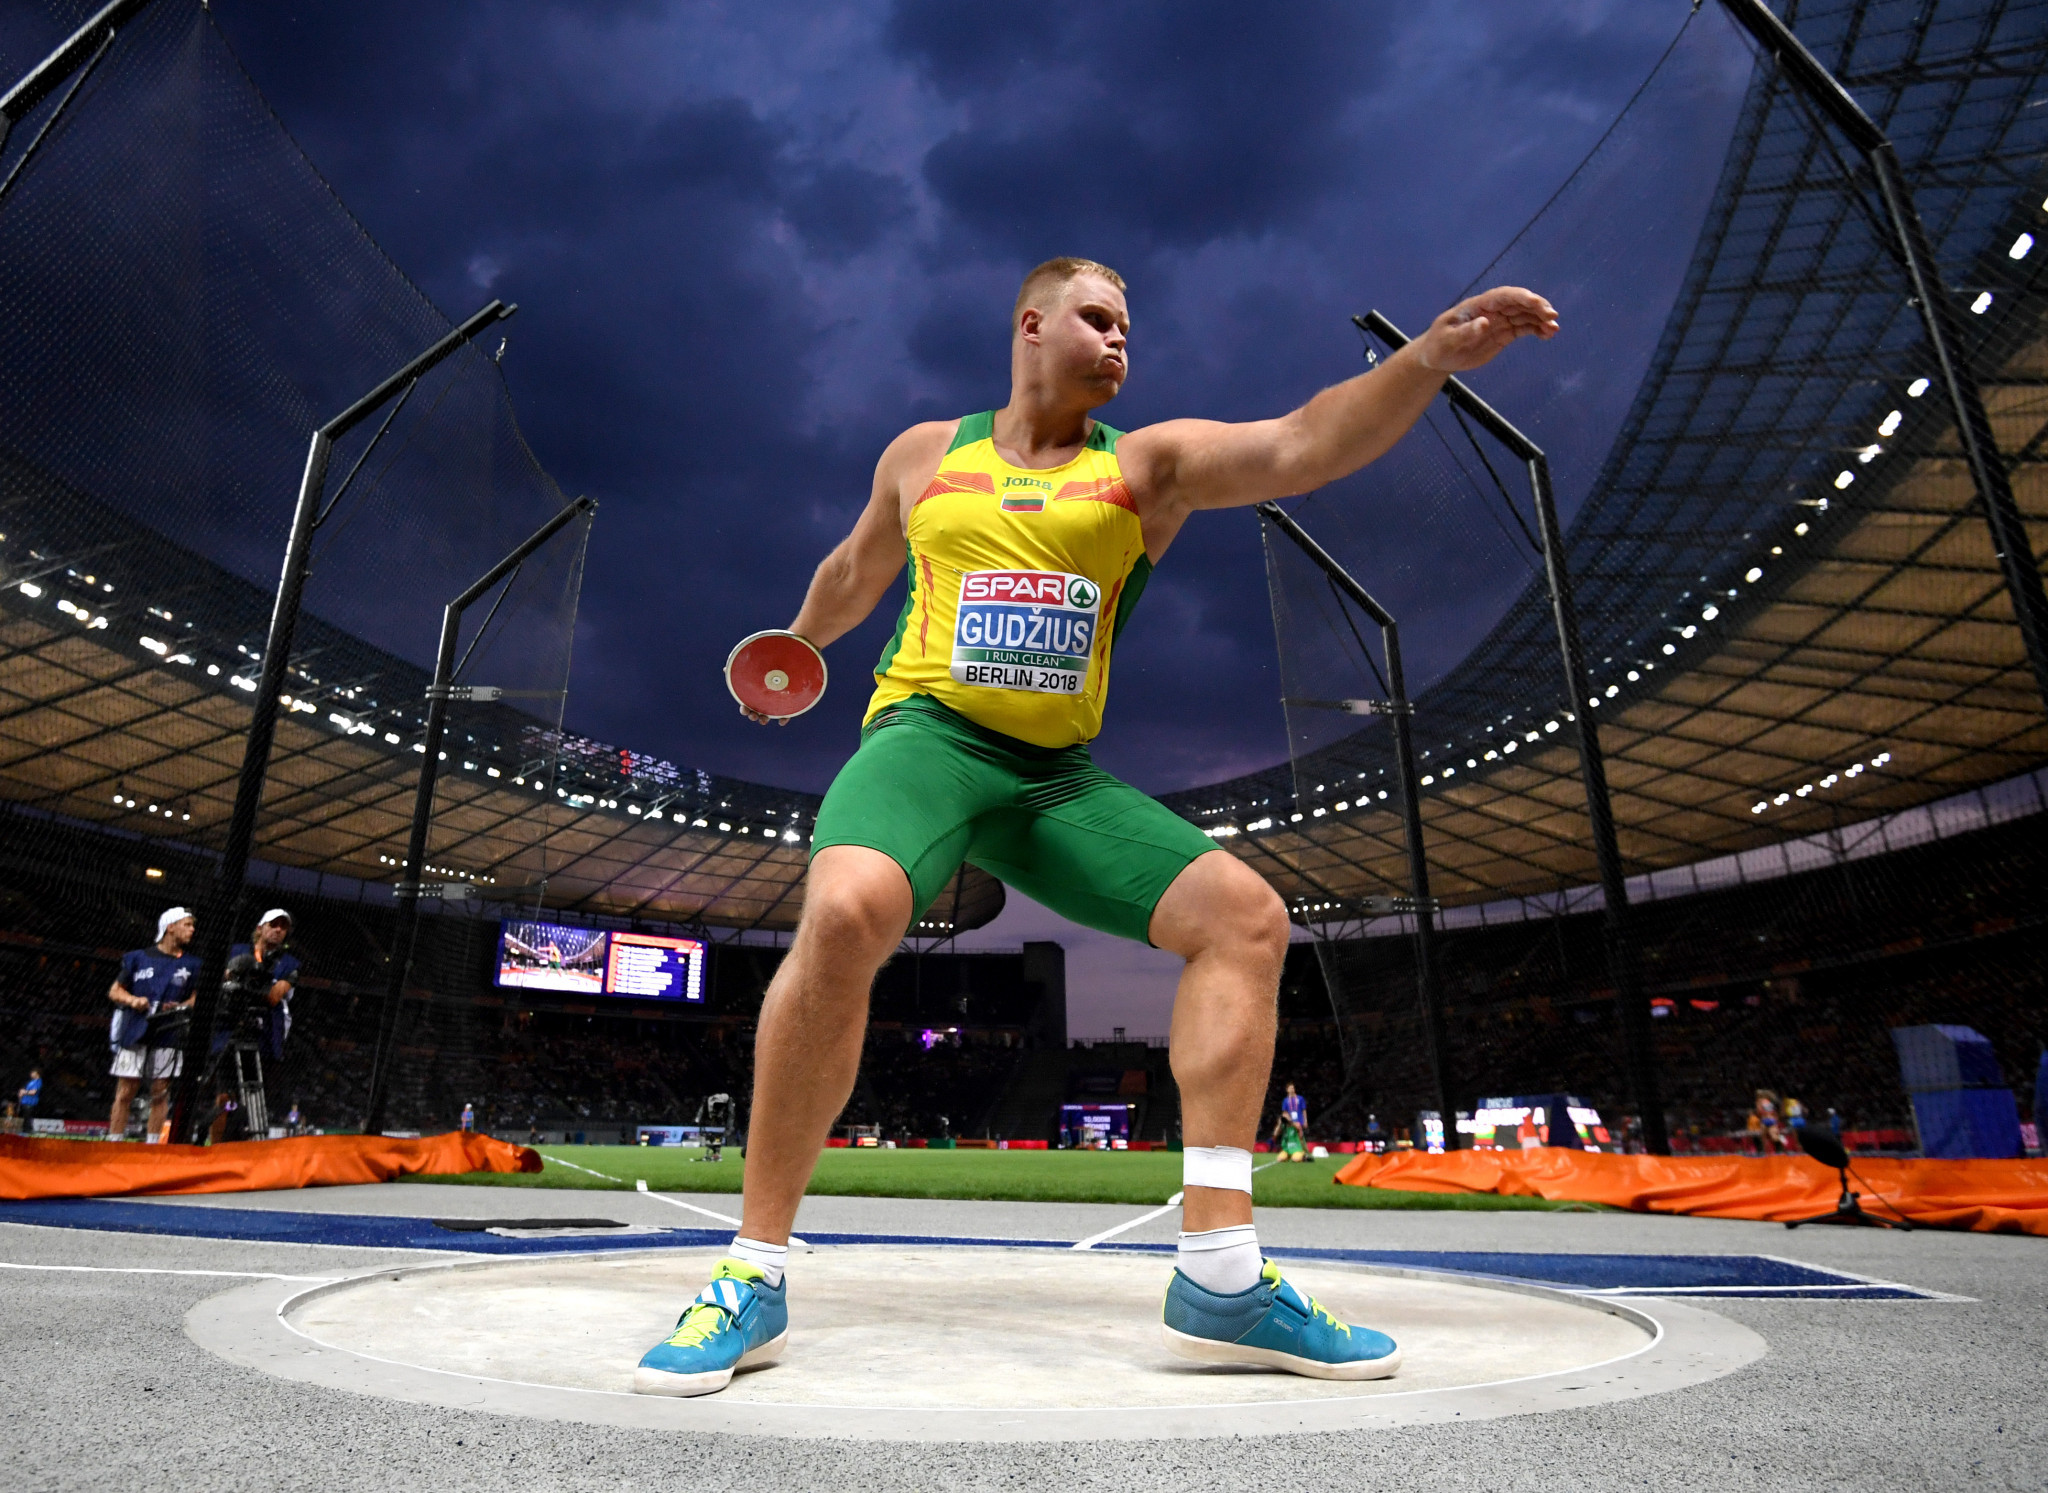 Lithuania's world discus champion Andrius Gudzius won the European title with his final throw ©Getty Images  